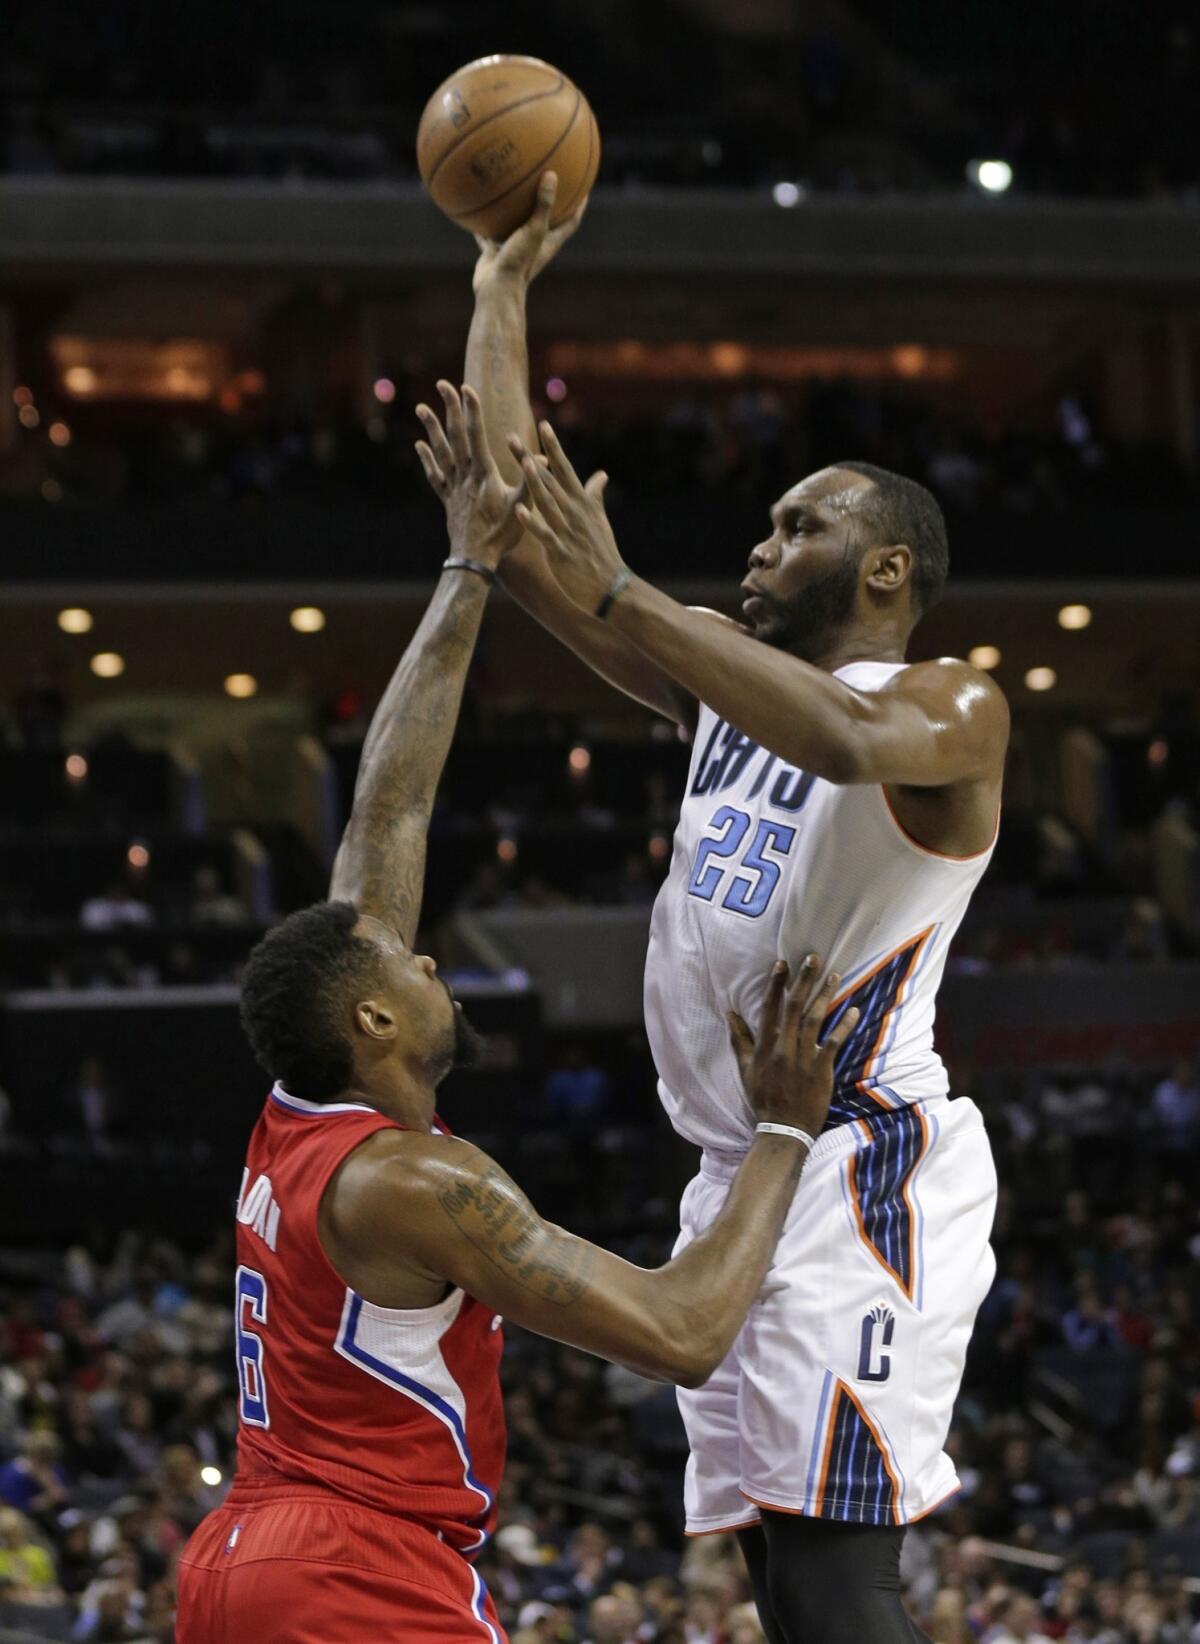 Bobcats center Al Jefferson, right, shoots over Clippers center DeAndre Jordan during a game in Charlotte, N.C.